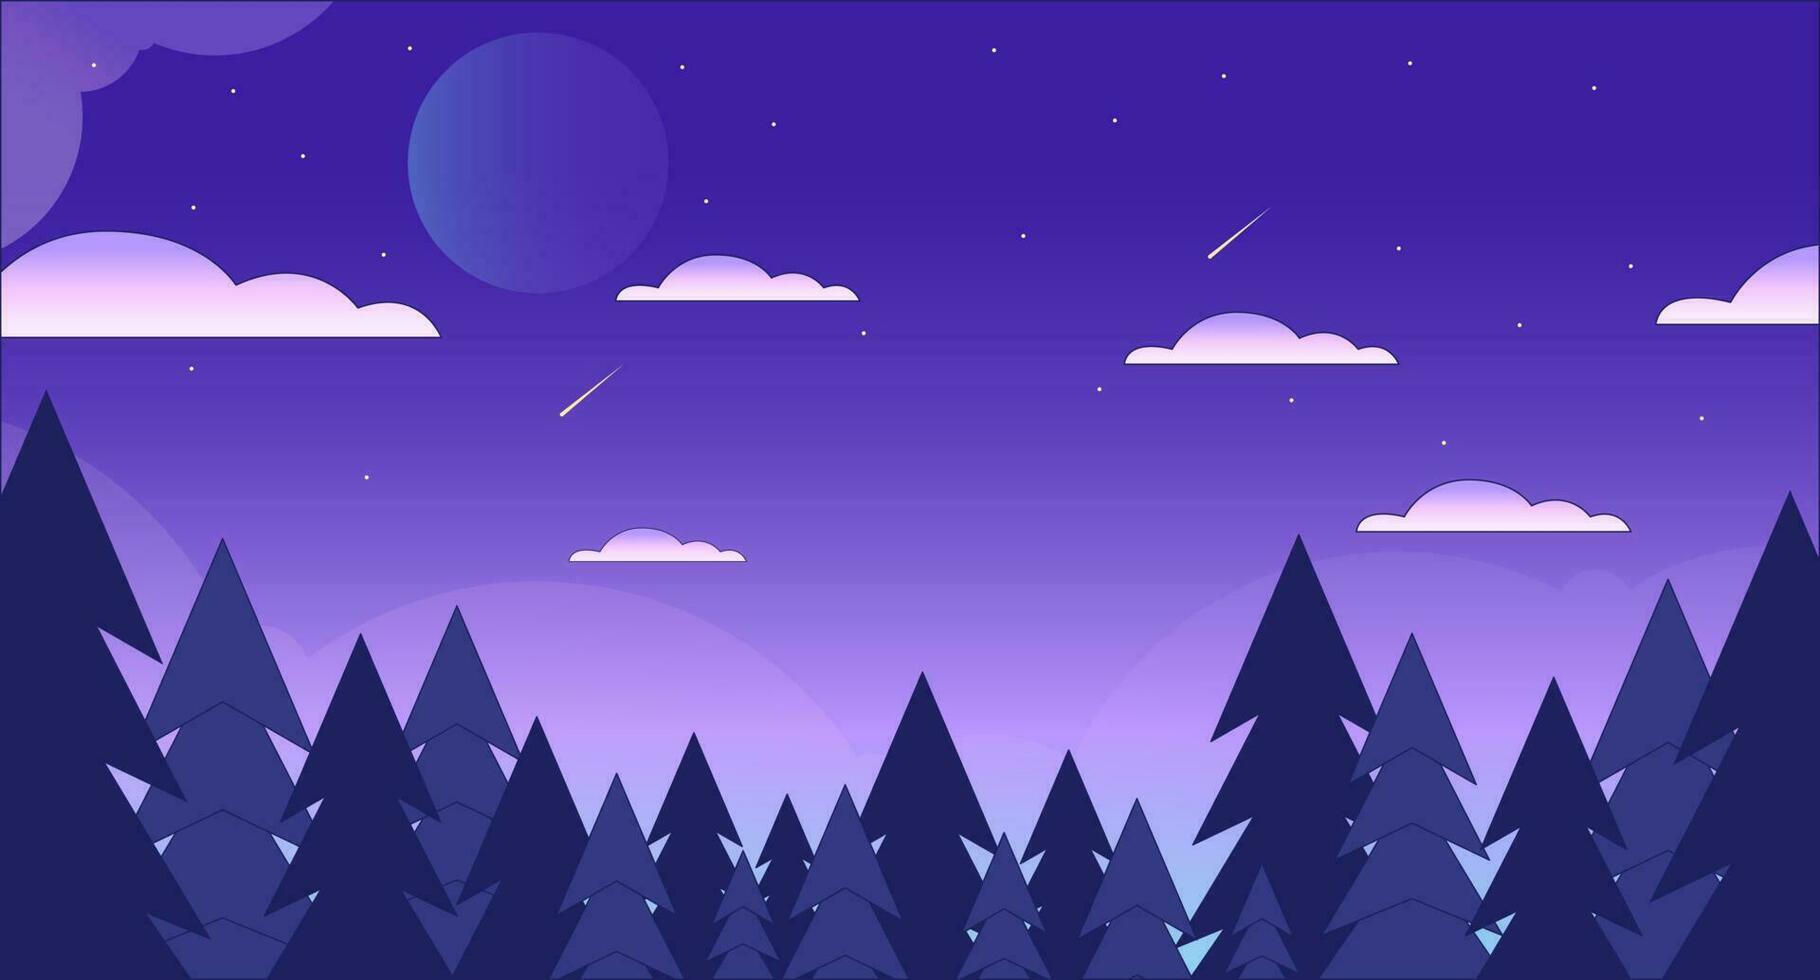 A purple sky with shooting stars, clouds and a full moon. - Woods